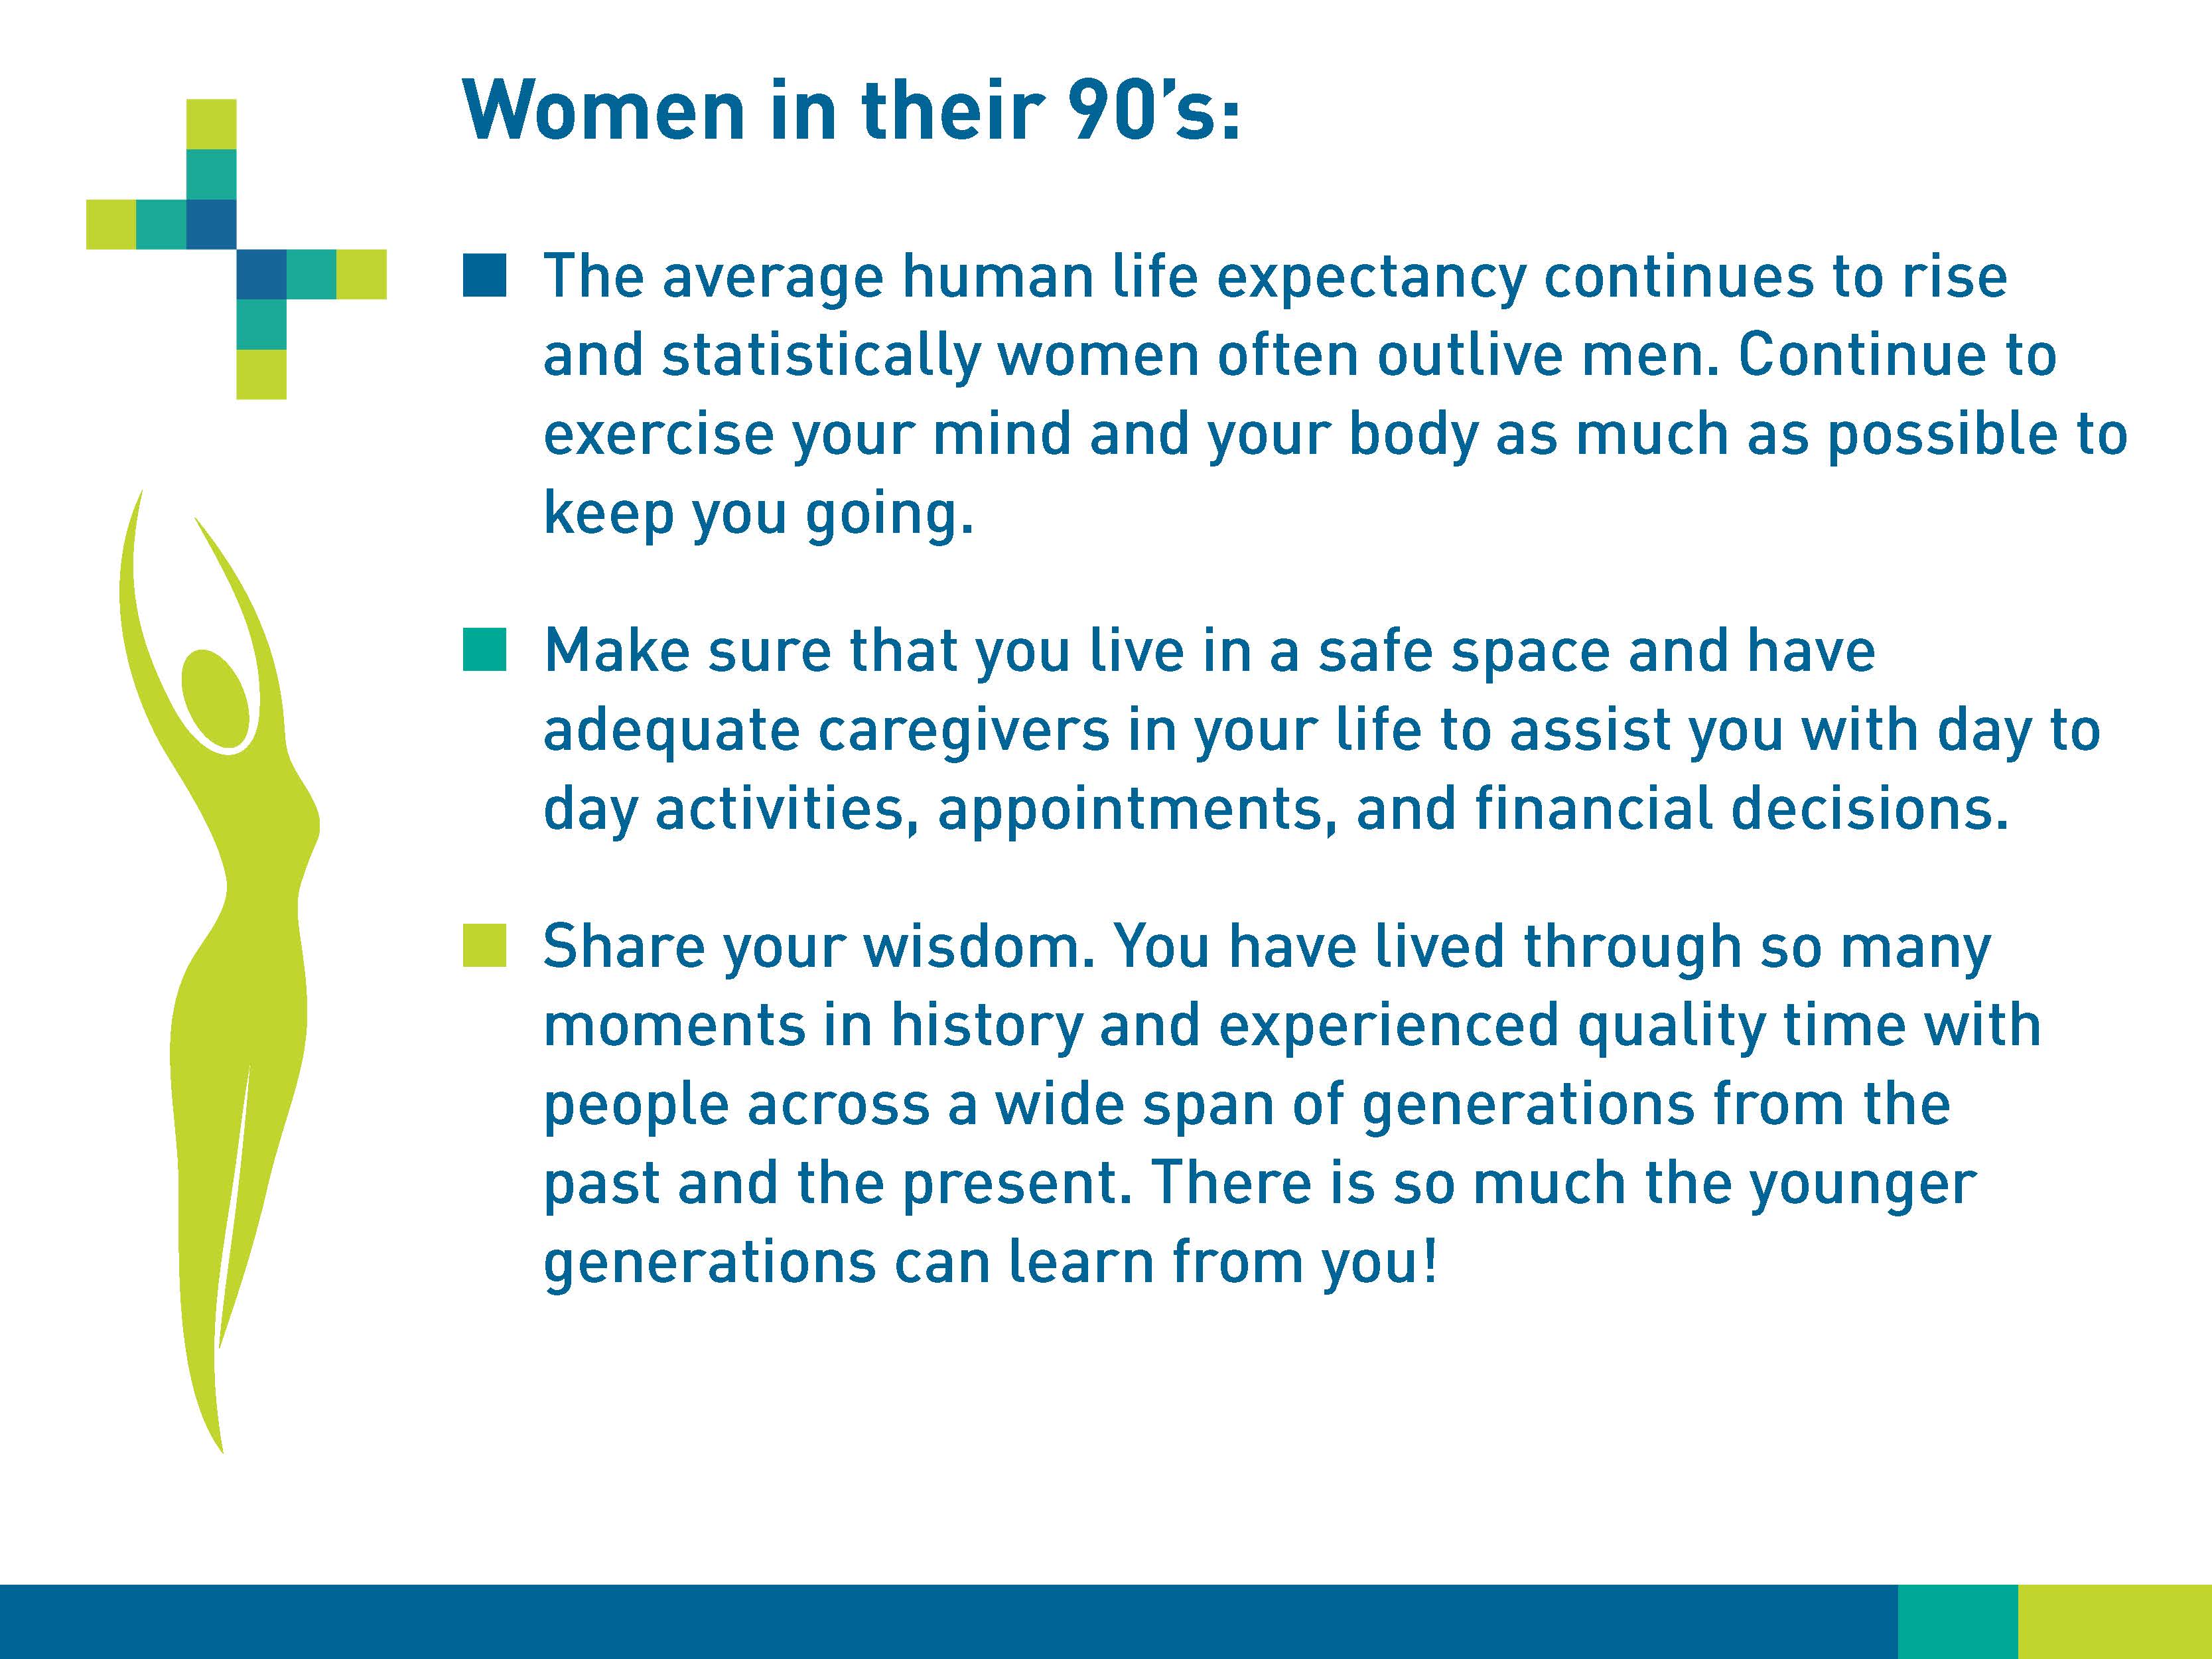 Women in their 90s: The average human life expectancy continues to rise and statistically women often outlive men. Continue to exercise your mind and your body as much as possible to keep you going. Make sure that you live in a safe place and have adequate caregivers in your life to assist you with day to day activities, appointments, and financial decisions. Share your wisdom. You have lived through so many moments in history and experienced quality time with people across a wide span of generations from the past and the present. There is so much the younger generations can learn from you!